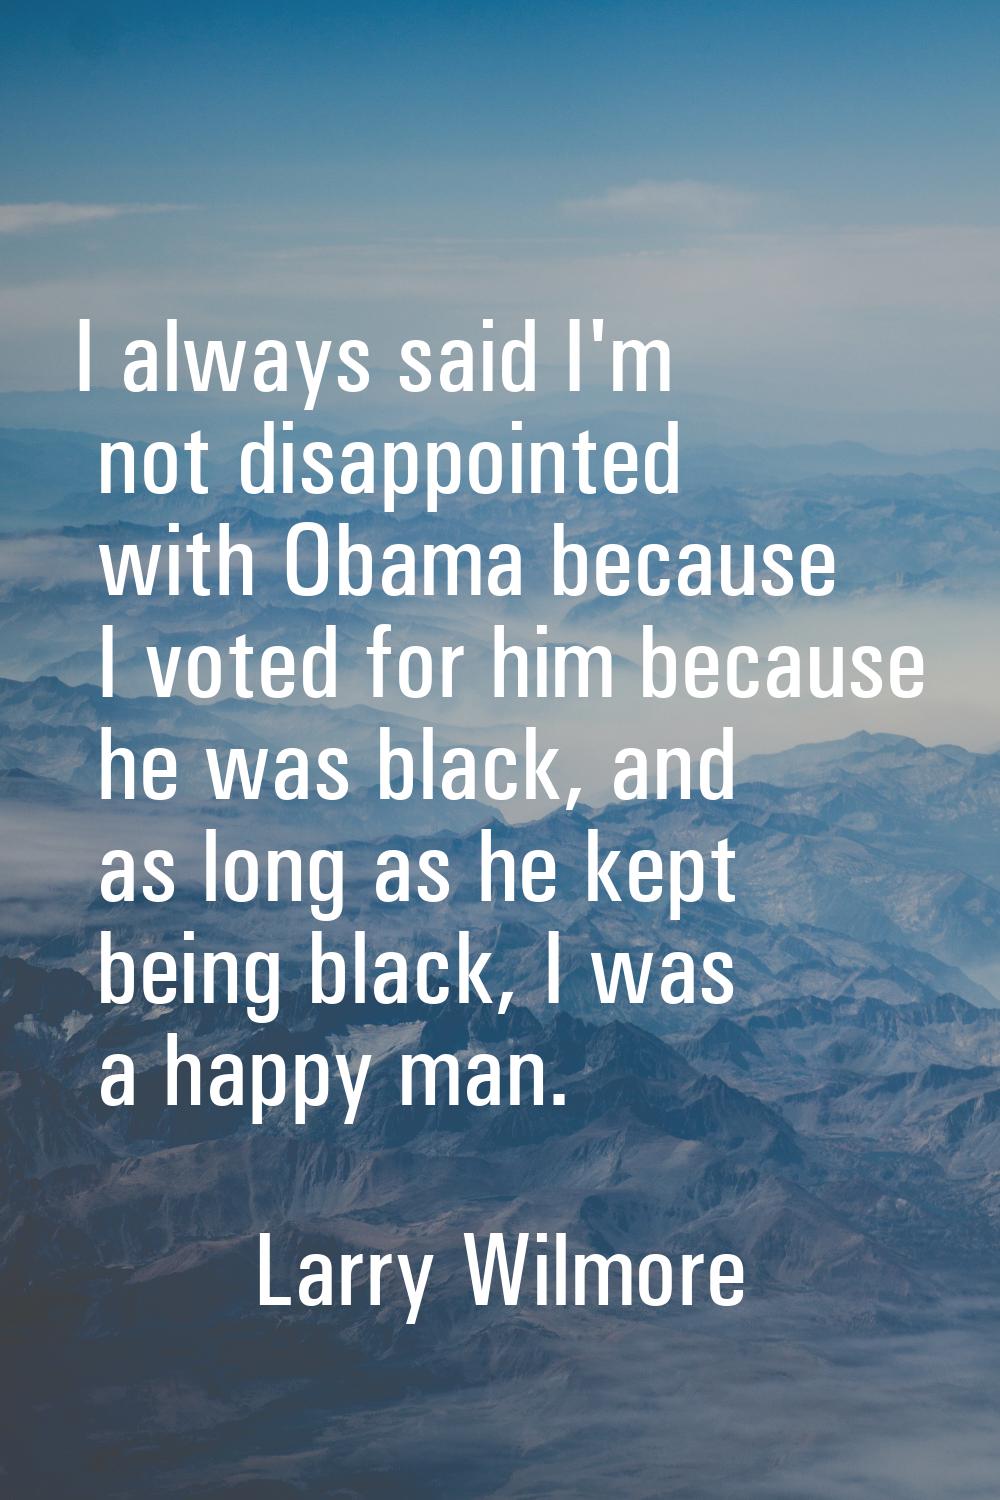 I always said I'm not disappointed with Obama because I voted for him because he was black, and as 